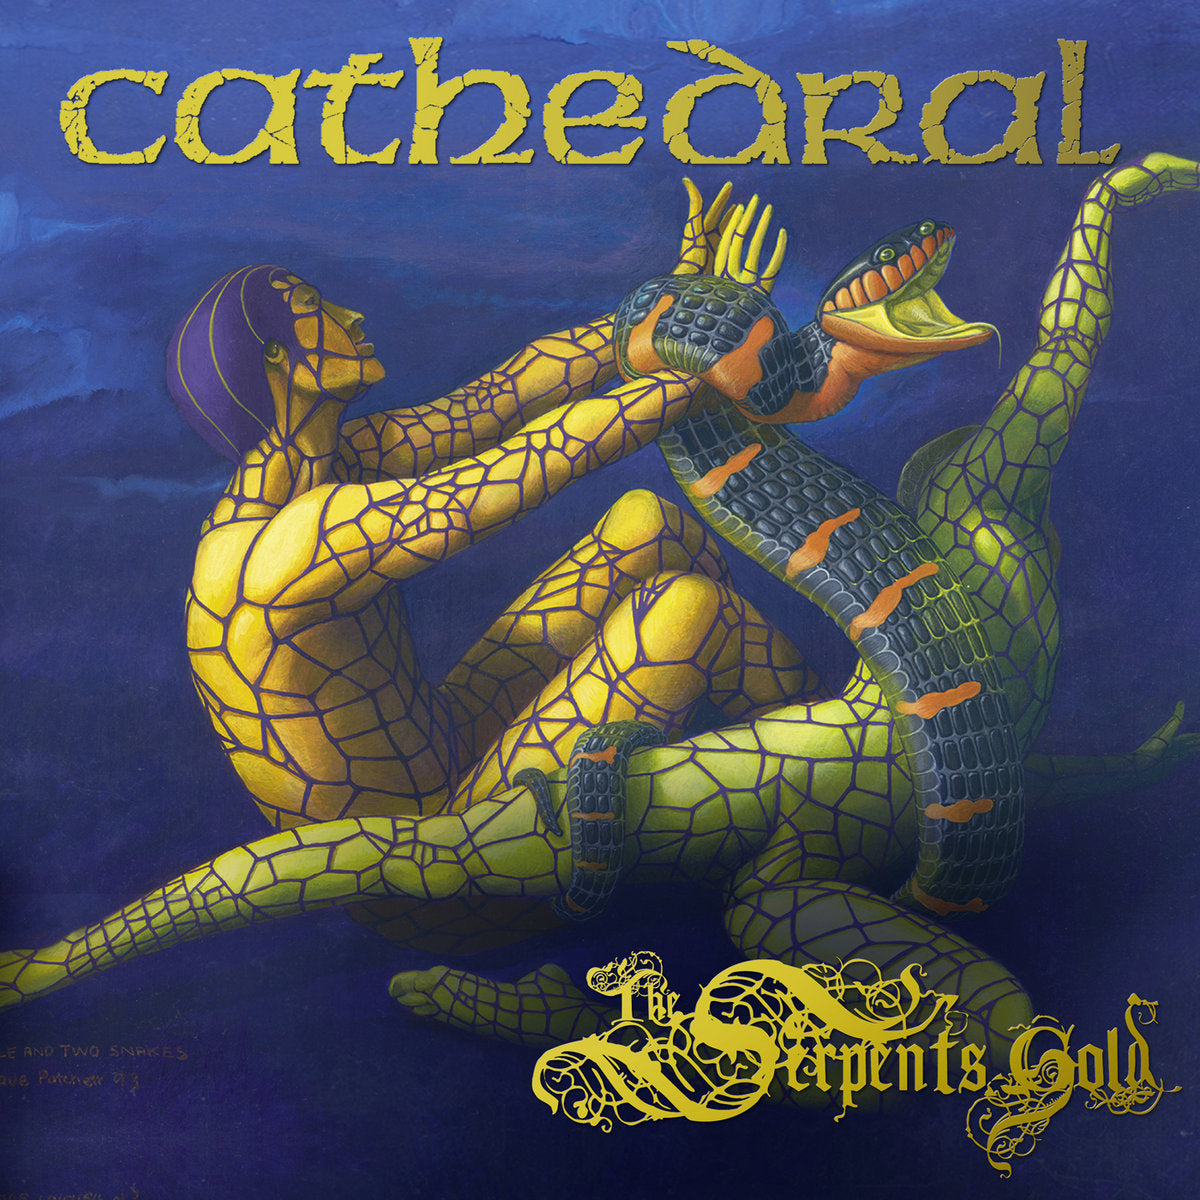 Cathedral "The Serpent's Gold" 2CD